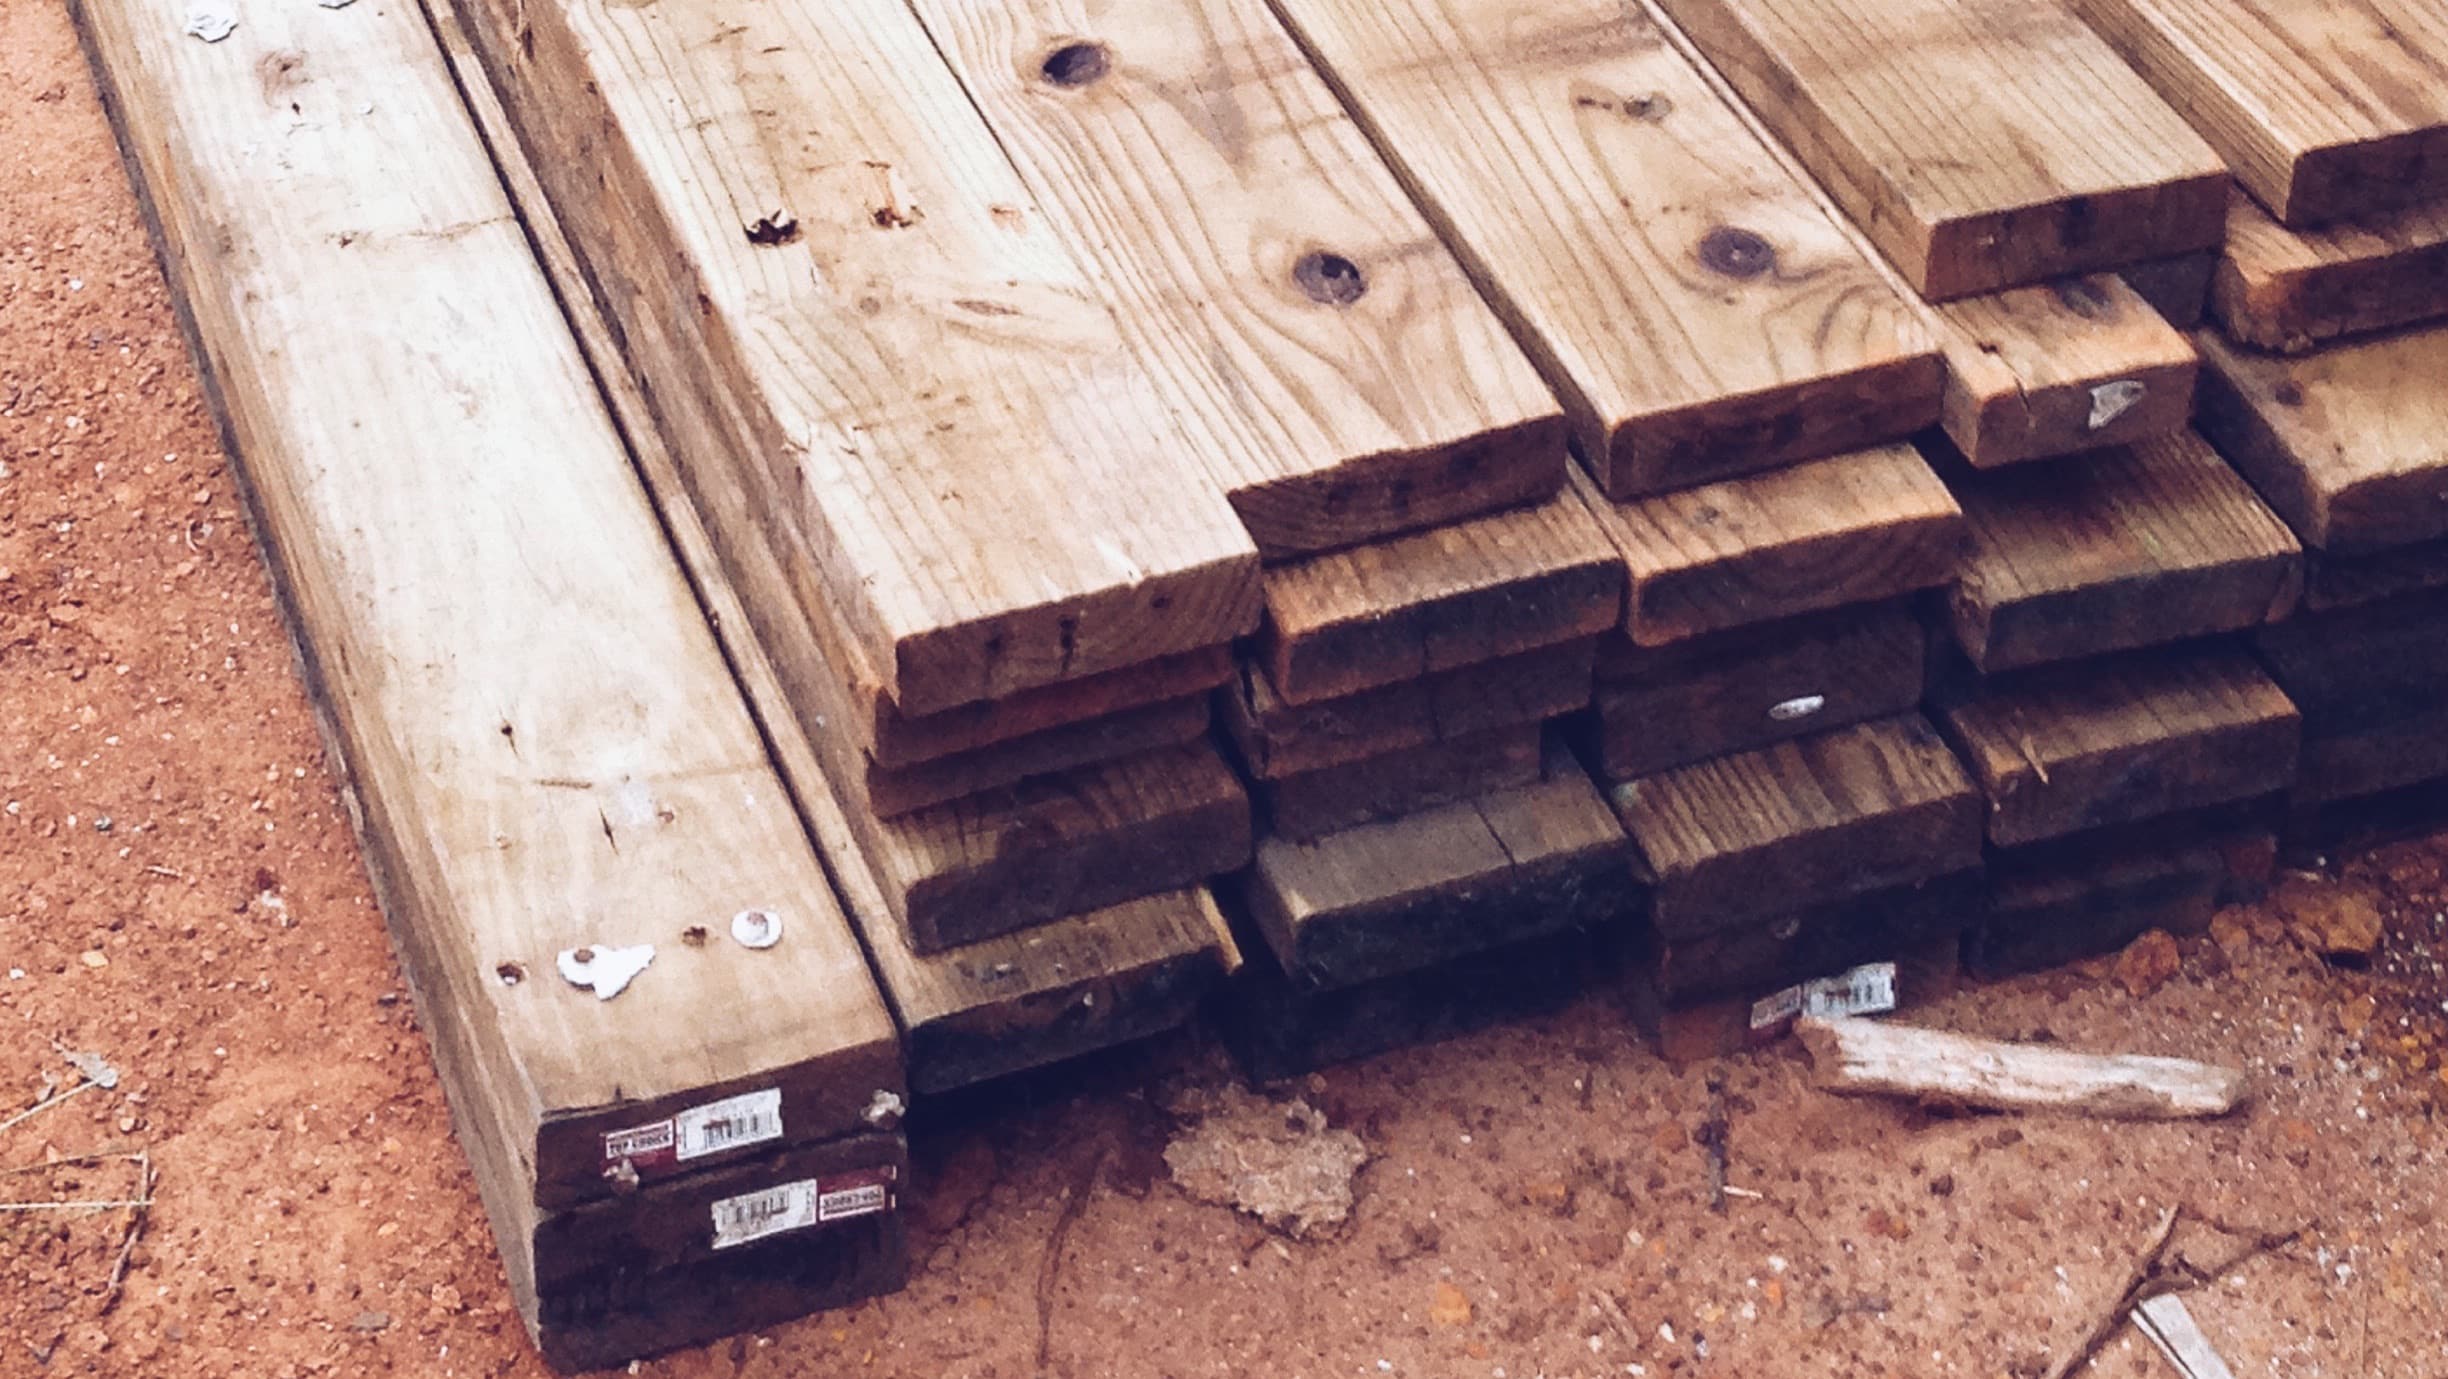 A stack of reclaimed lumber